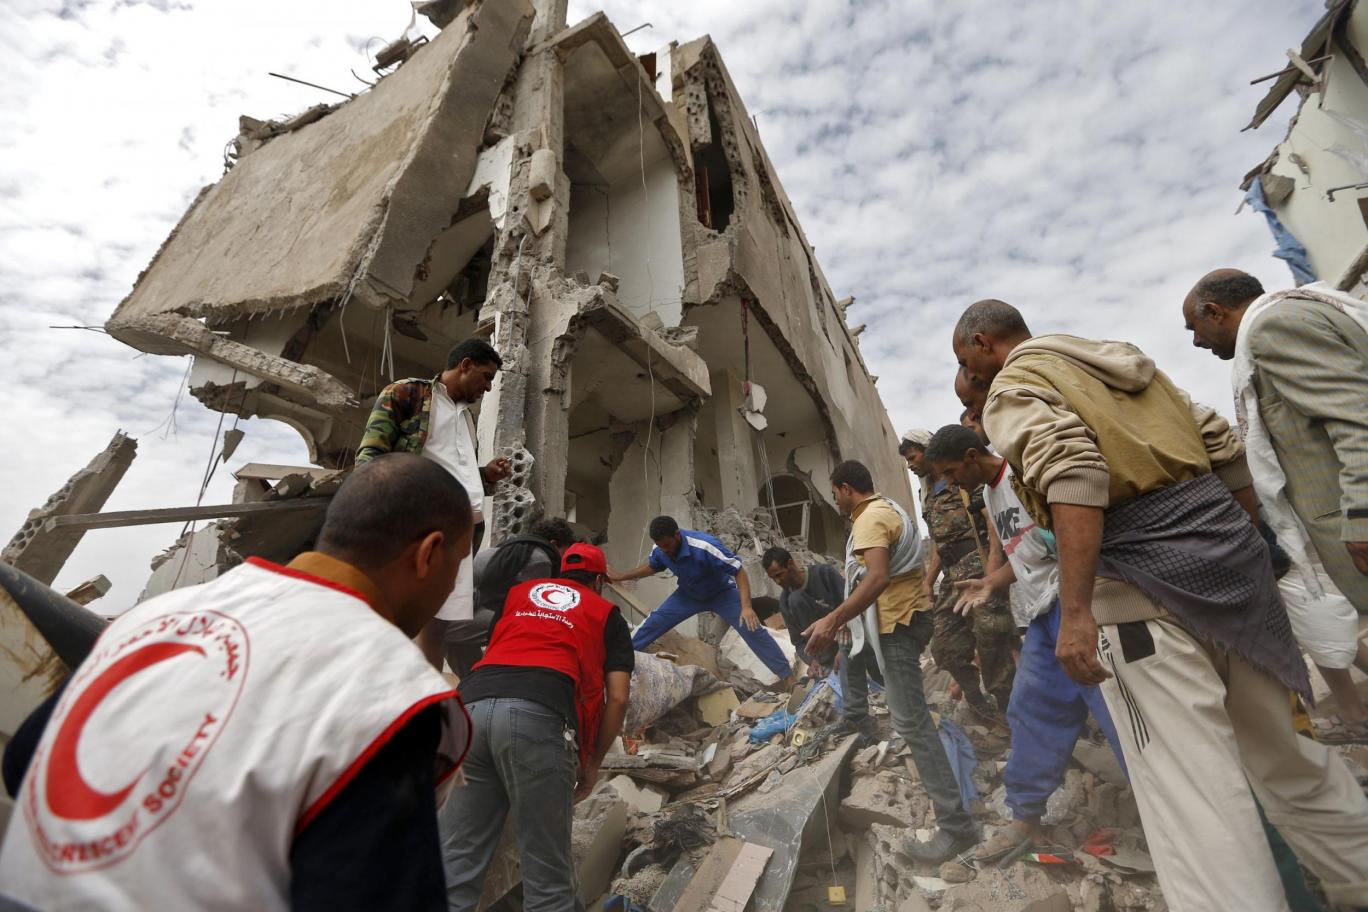 Rescuers search under the rubble of a house destroyed in a Saudi-led air strike in the Yemeni capital Sana’a last month